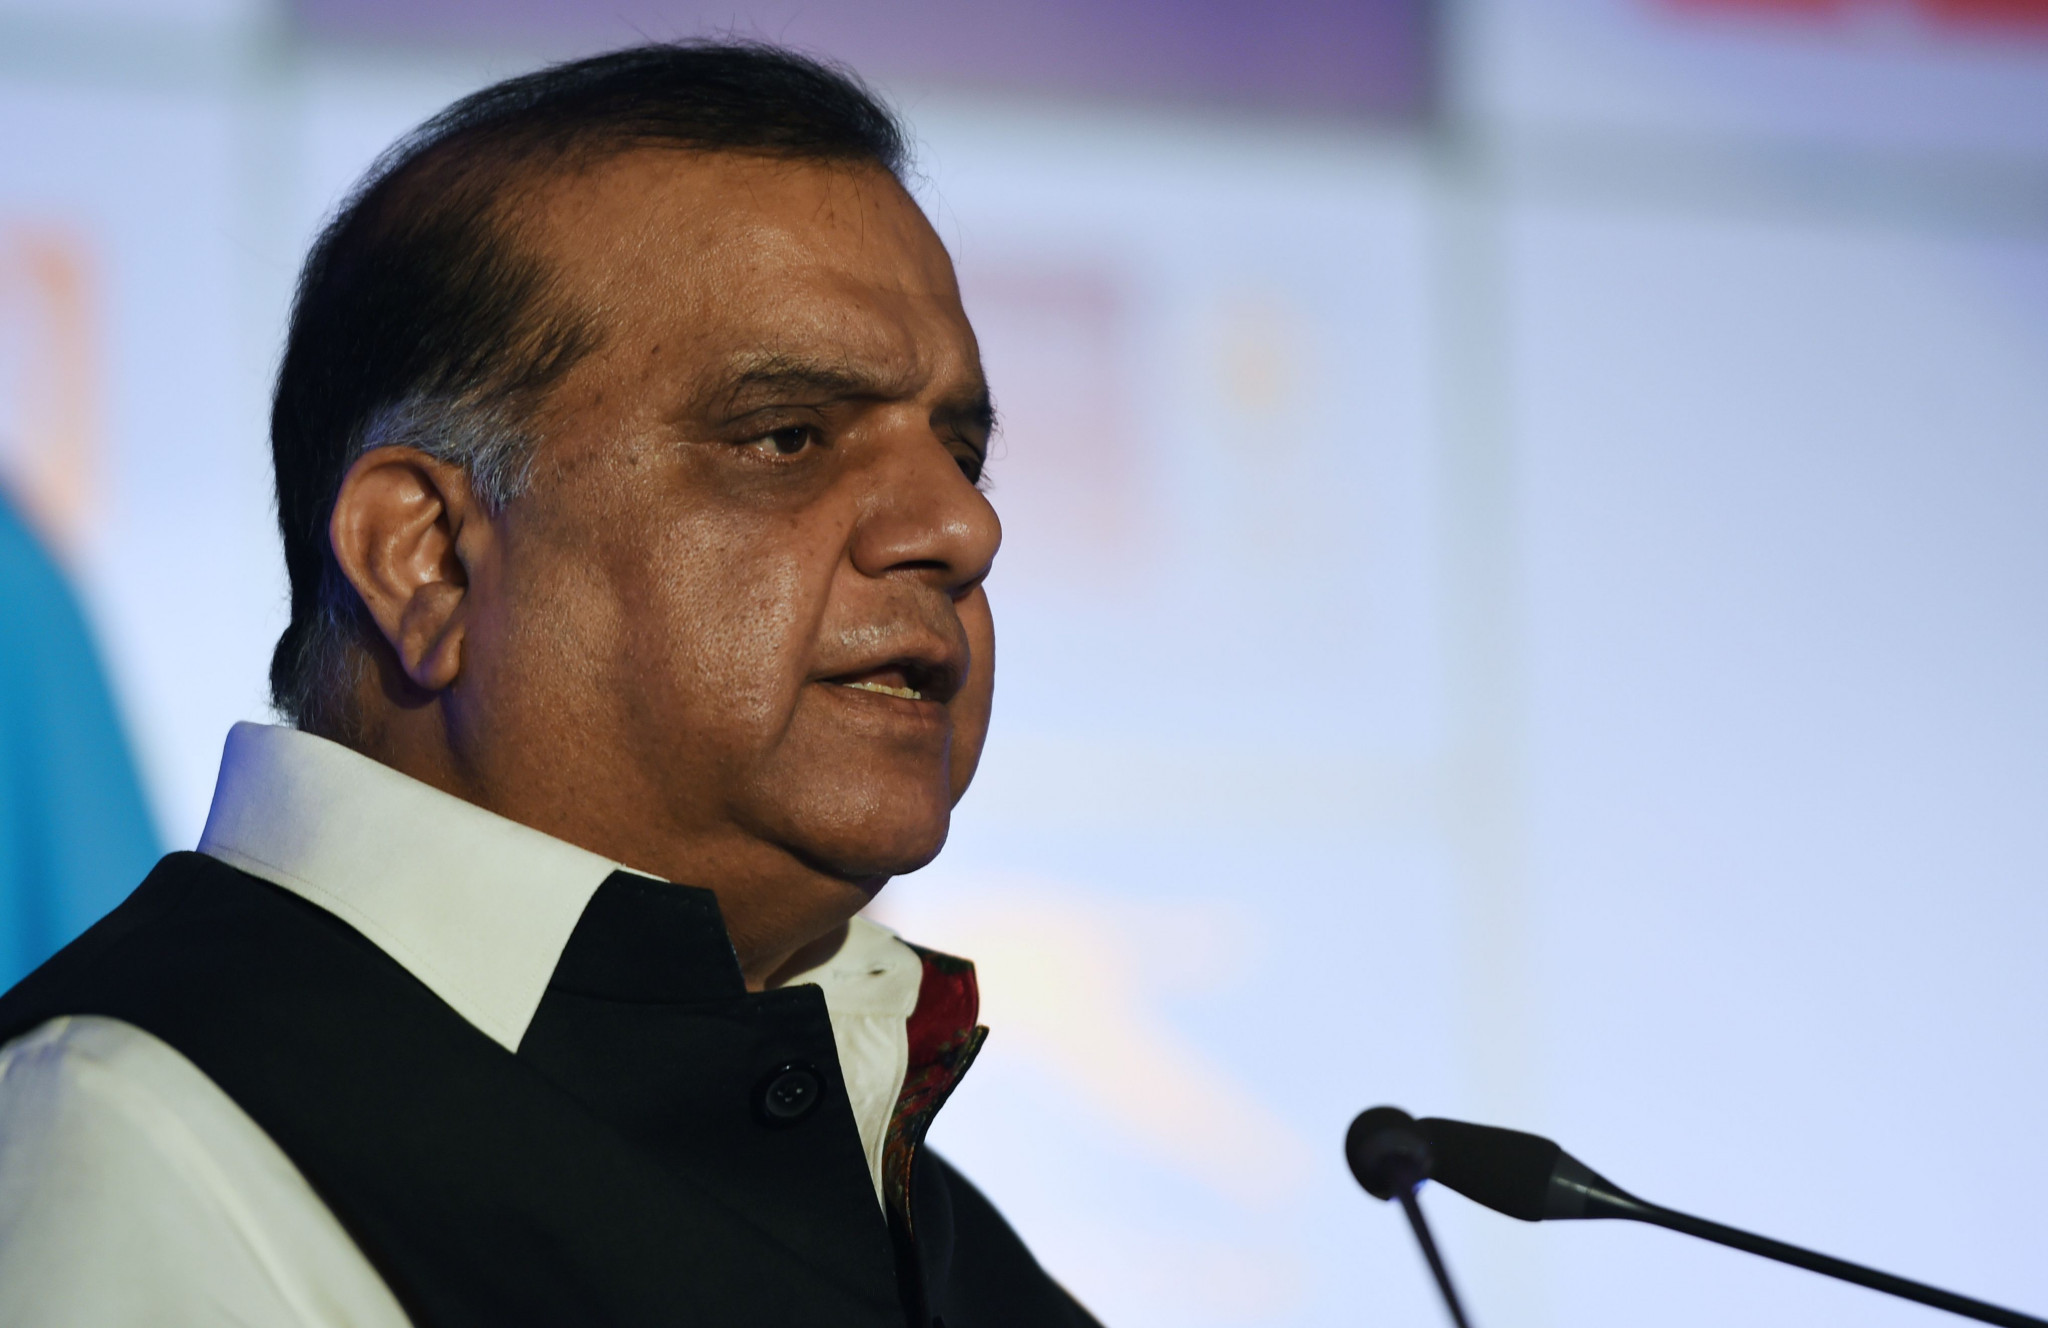 Narinder Batra resigned as IOA President in July, and a turbulent period has followed, with the IOC insisting it does not 